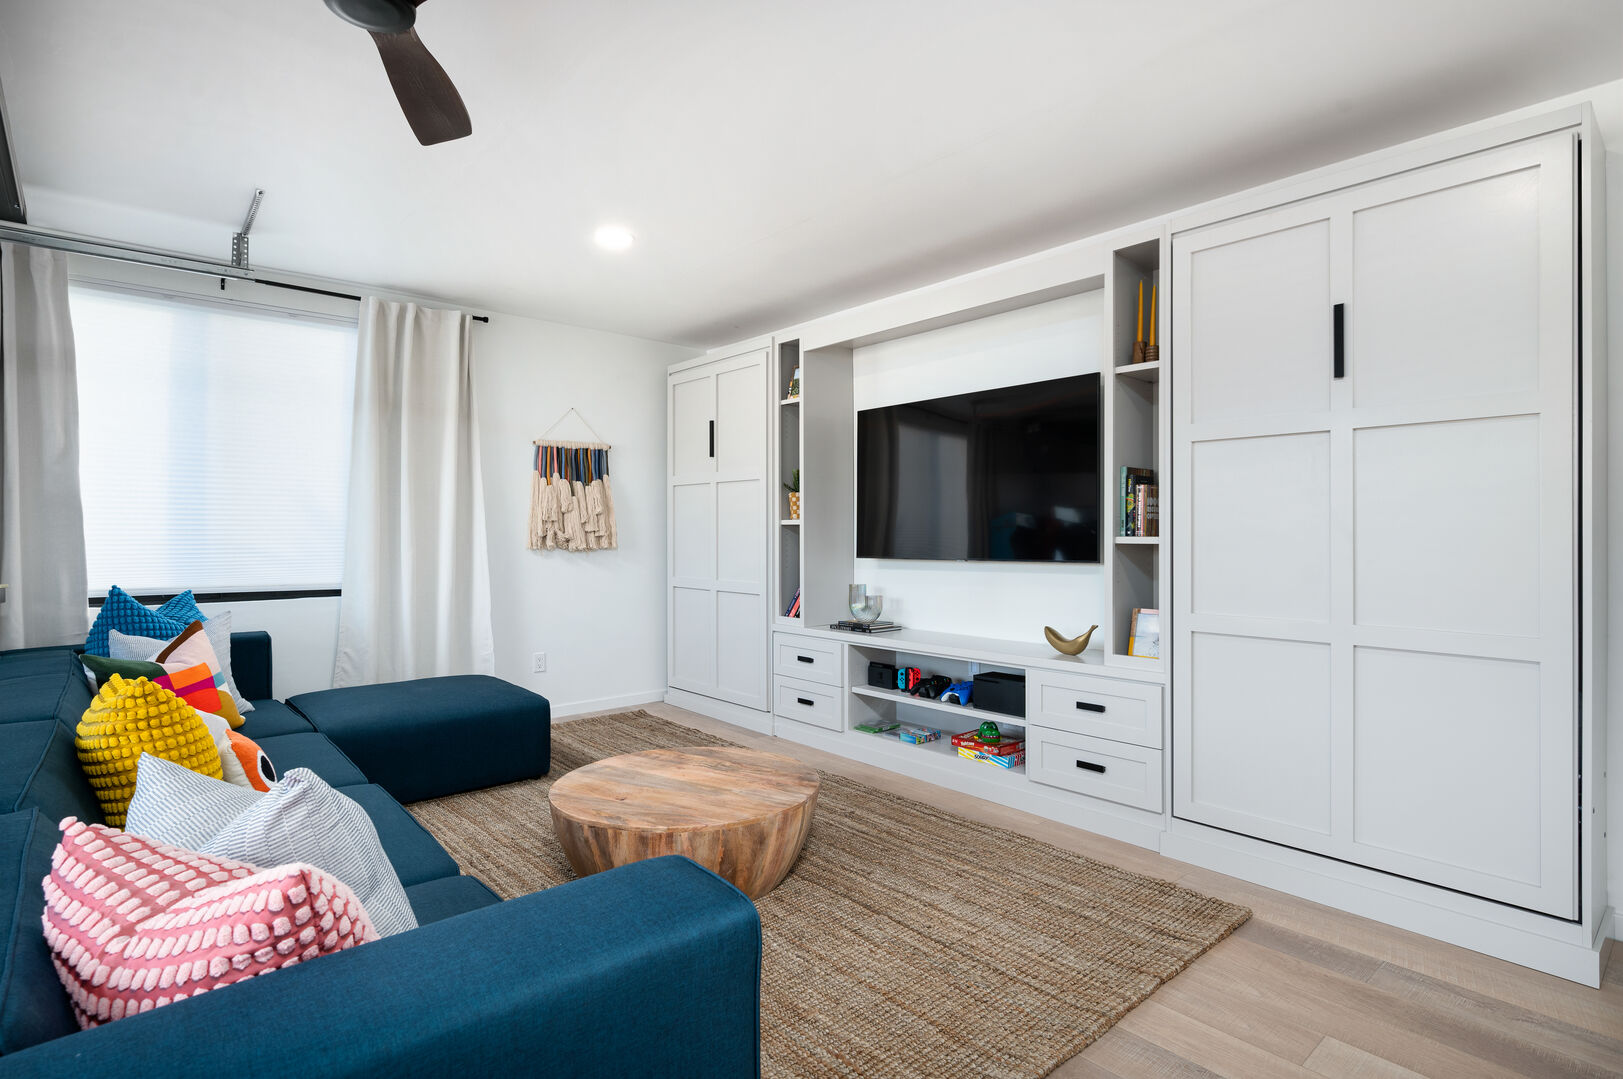 This bonus room is both for entertainment and has 2 surprises!